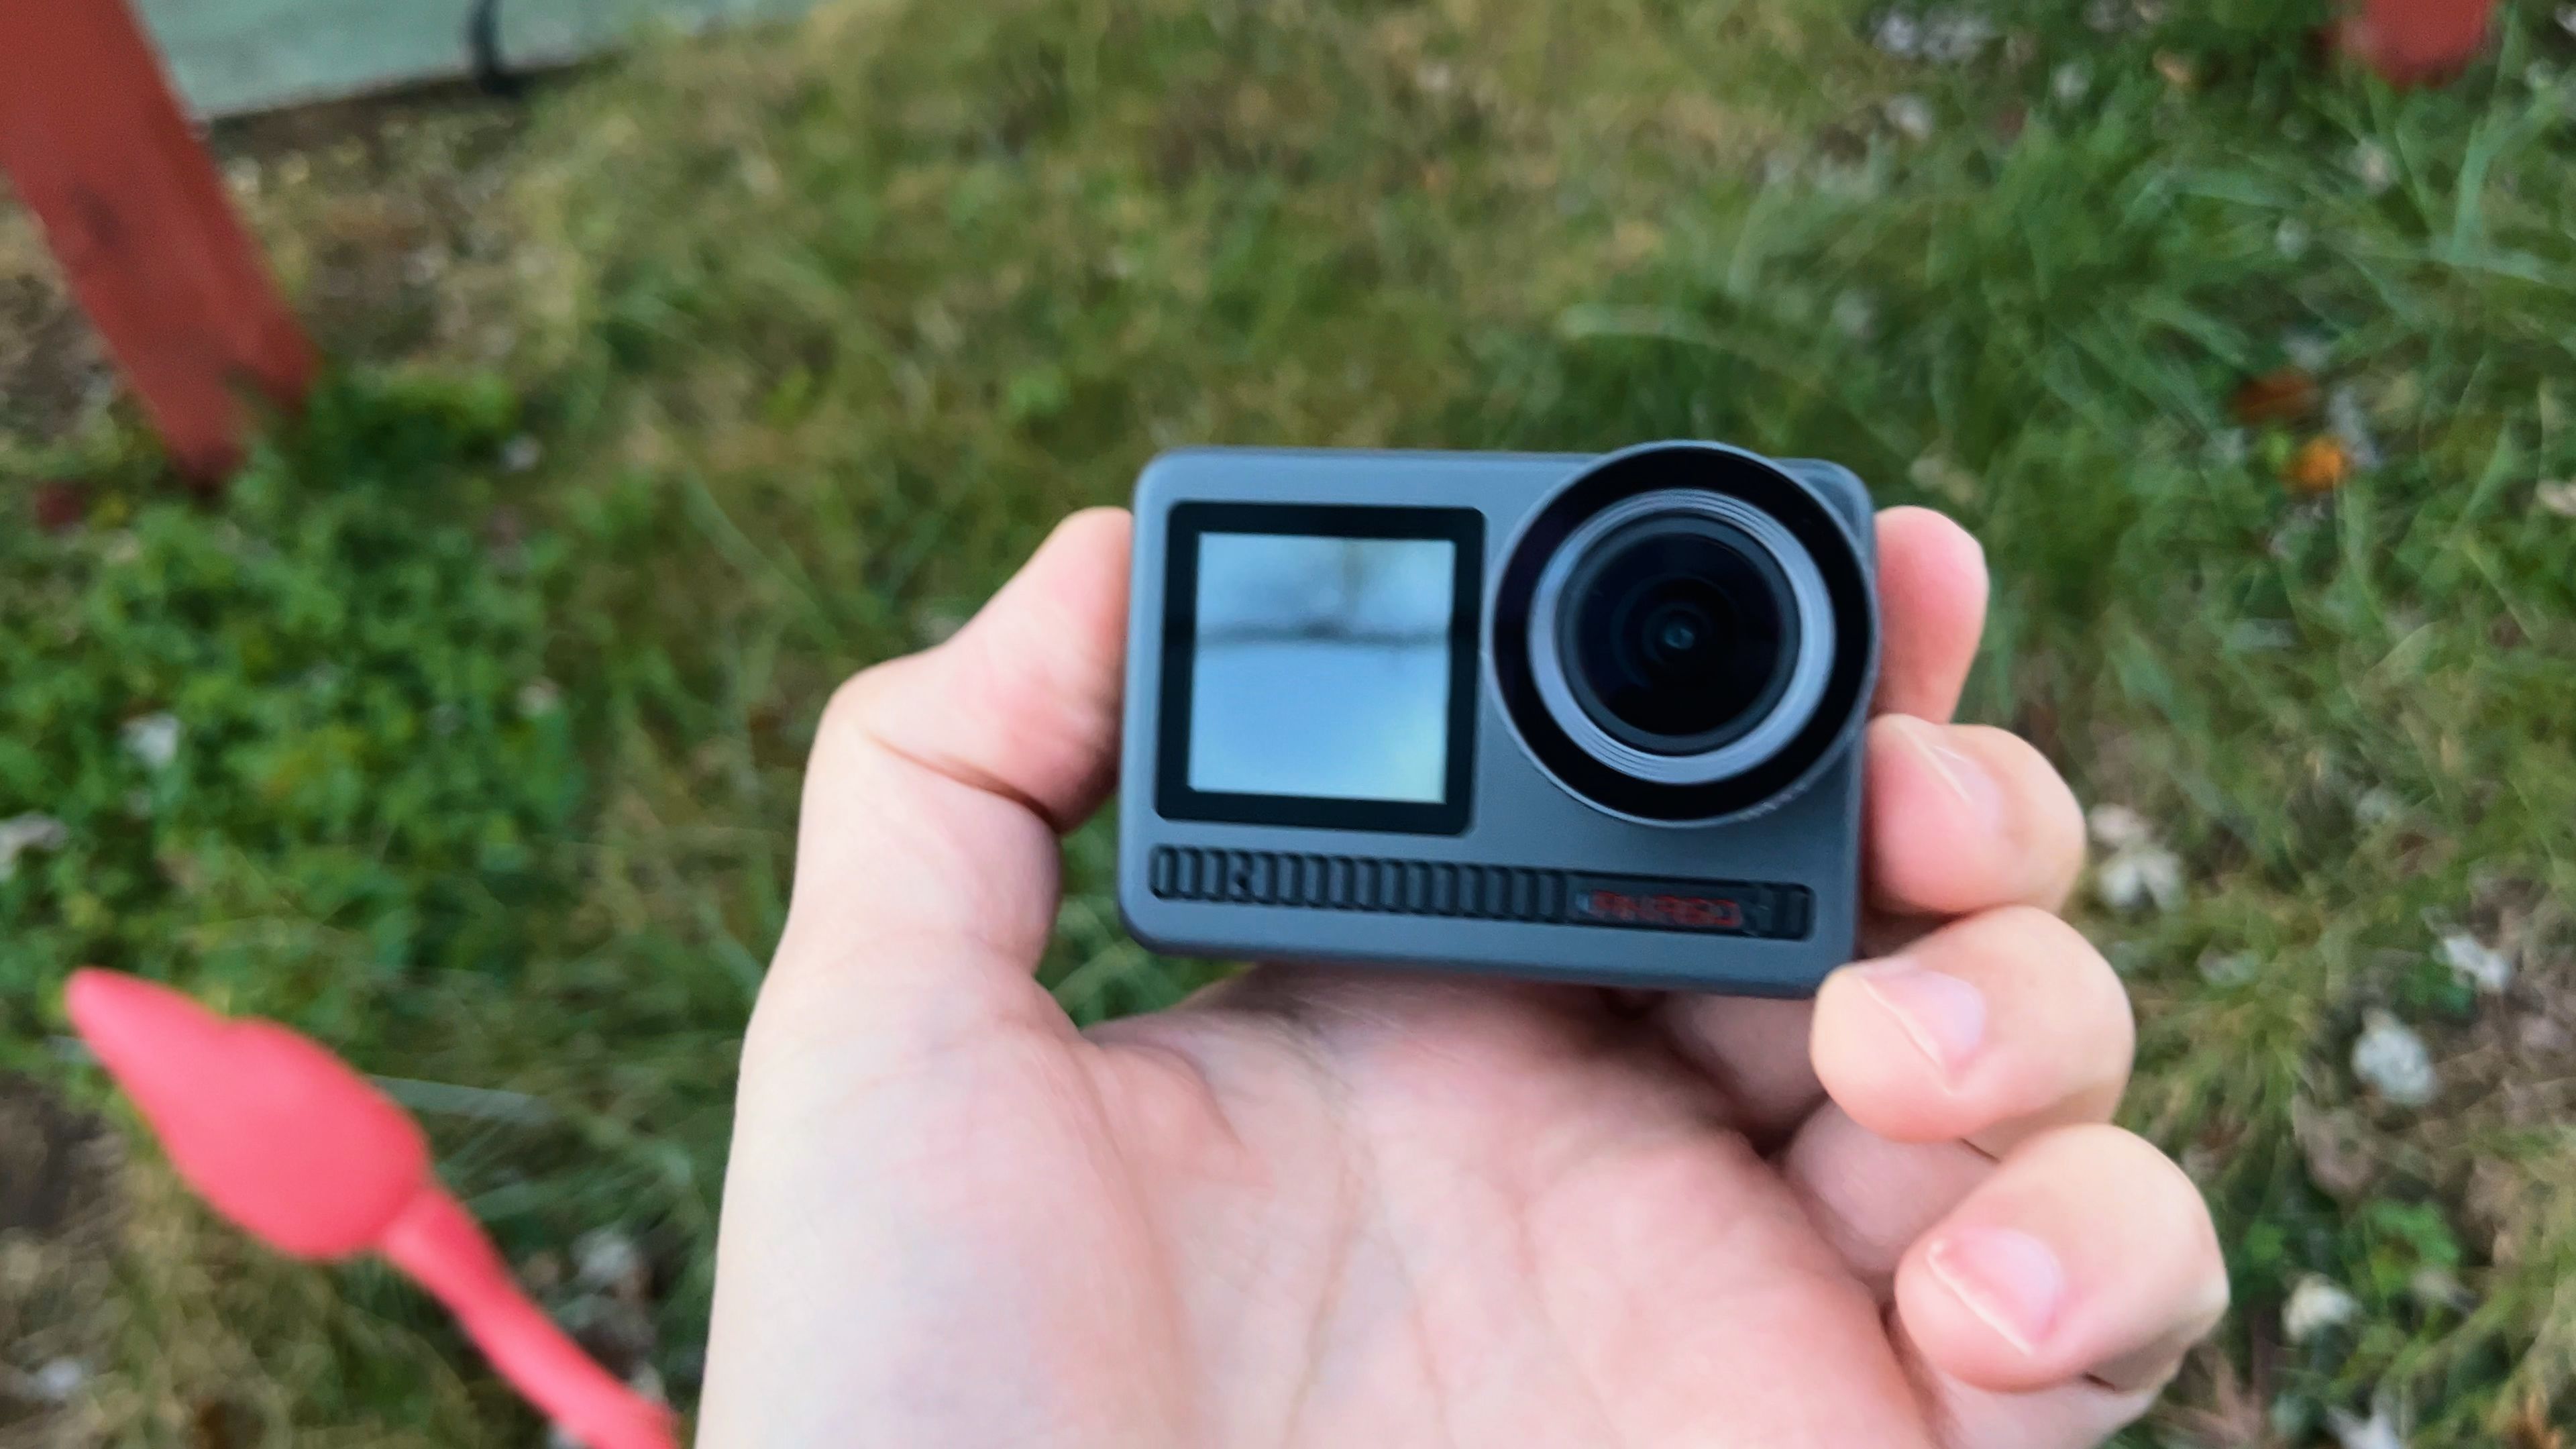 AKASO Brave 8 is an Expensive Action Camera With Unforgivably Buggy Software